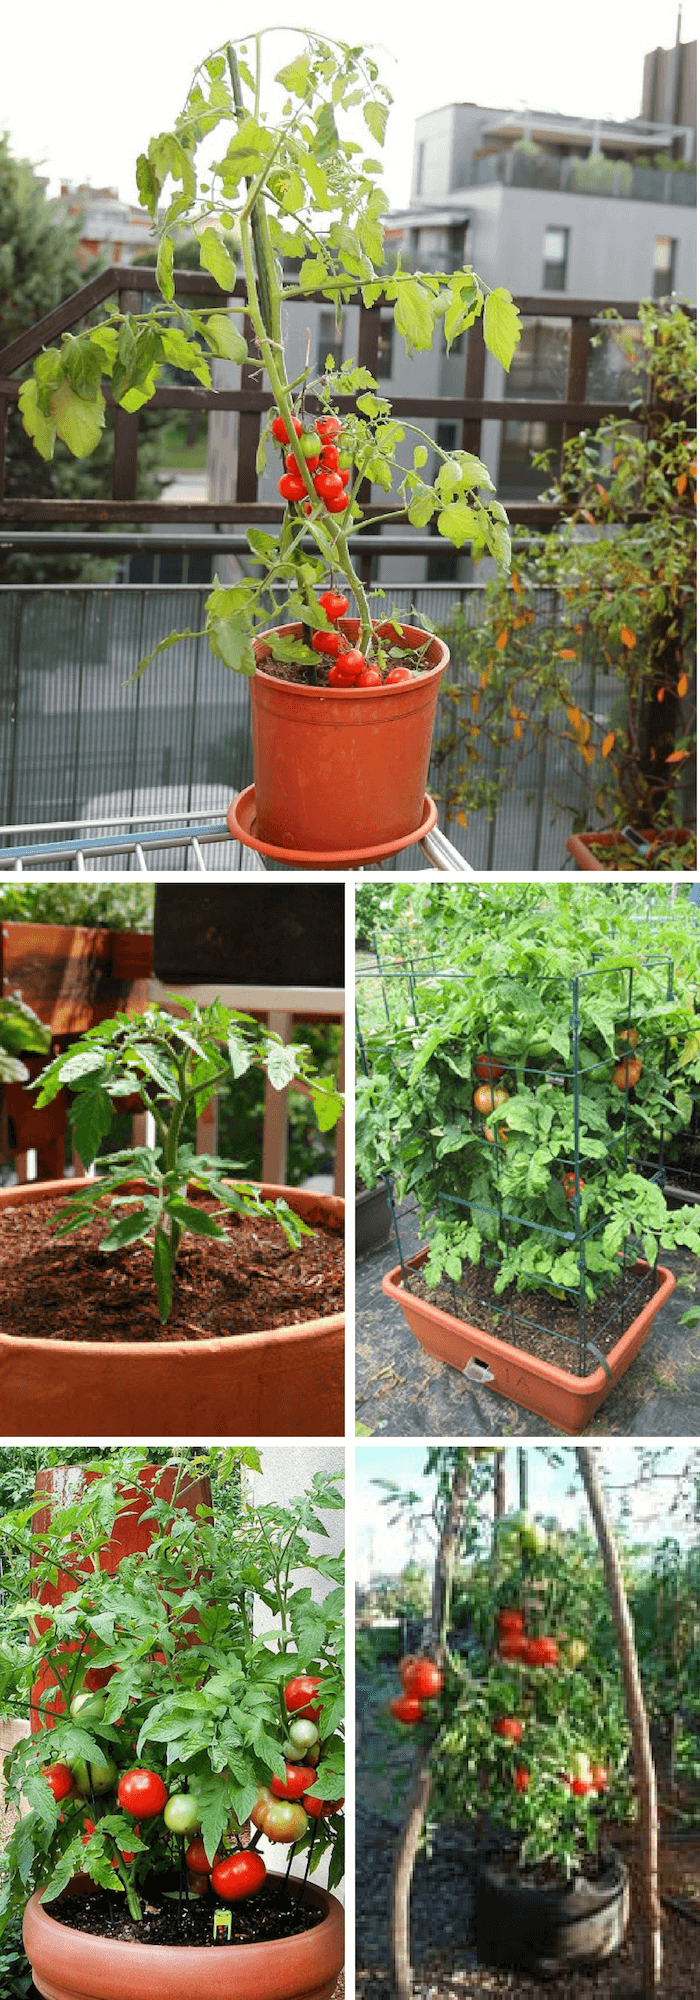 How to grow tomatoes in pots